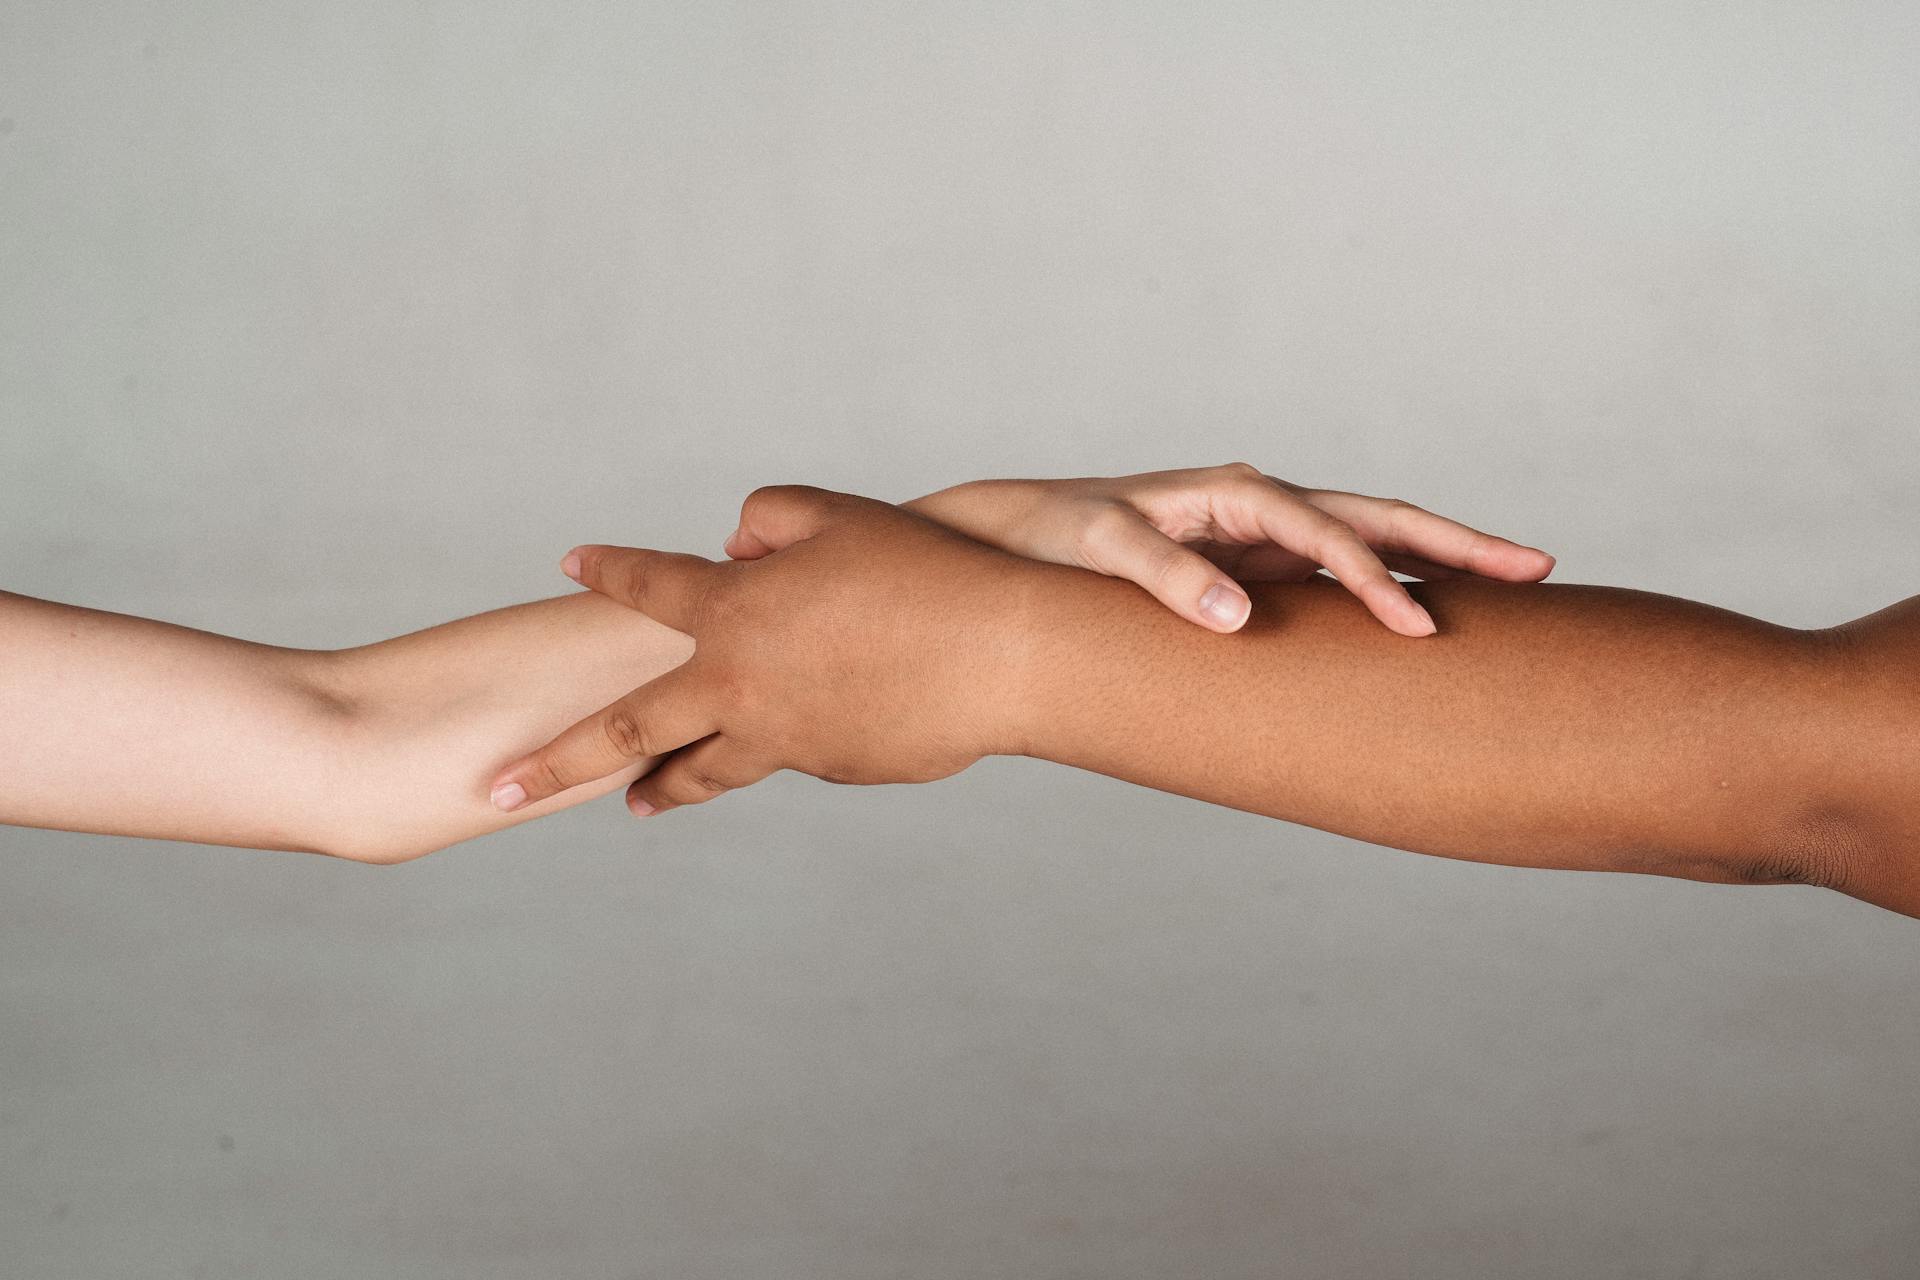 Crop anonymous multiracial female demonstrating unity and tolerance while reaching hands to each other in studio against gray background